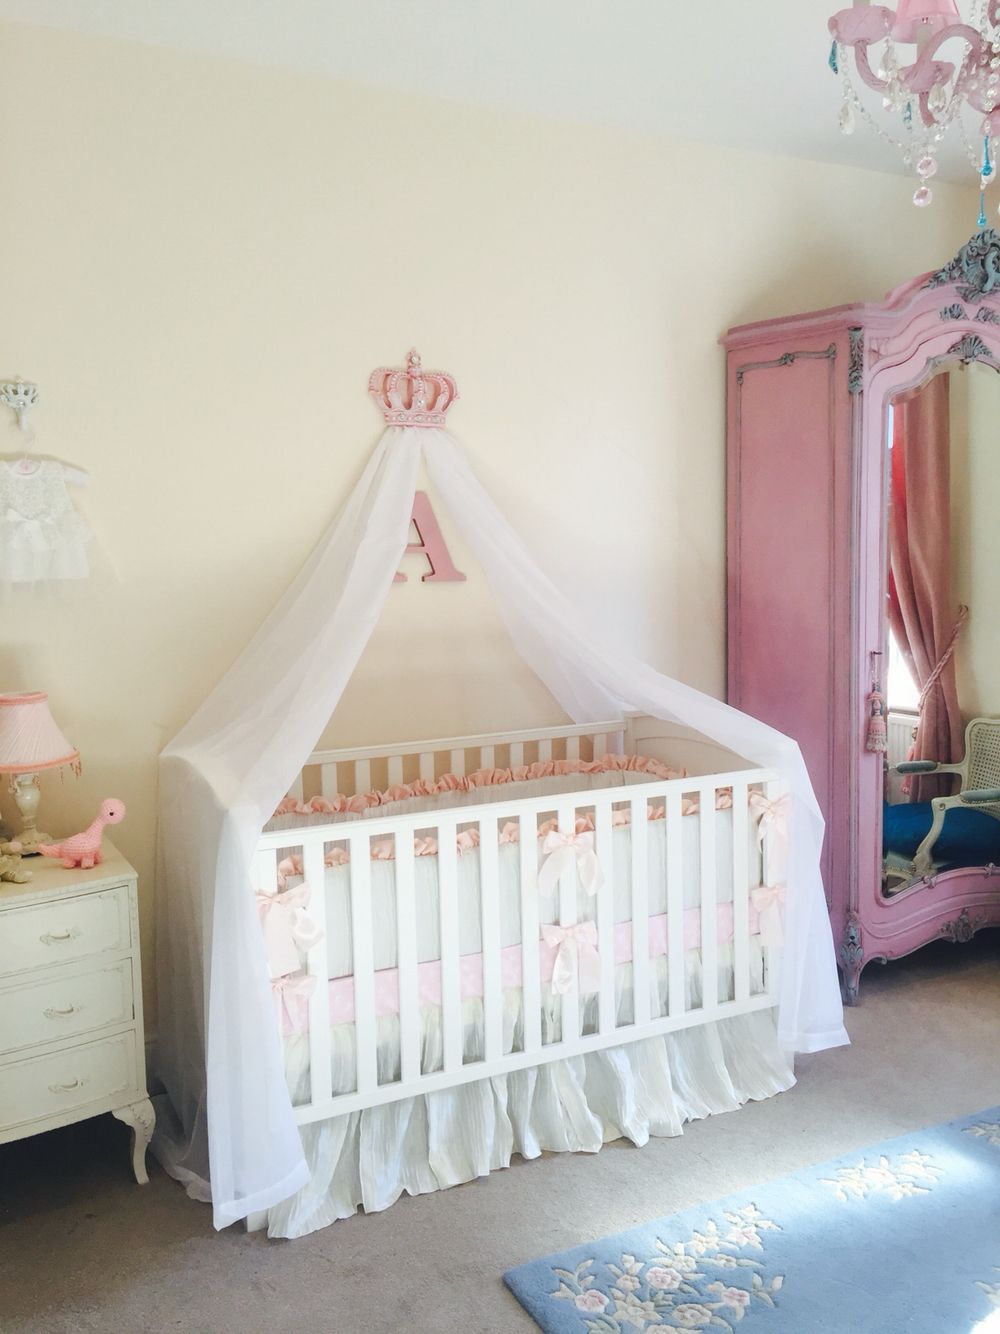 Princess Cots girls pink nursery cot canopy white bed princess crown OKULHLH